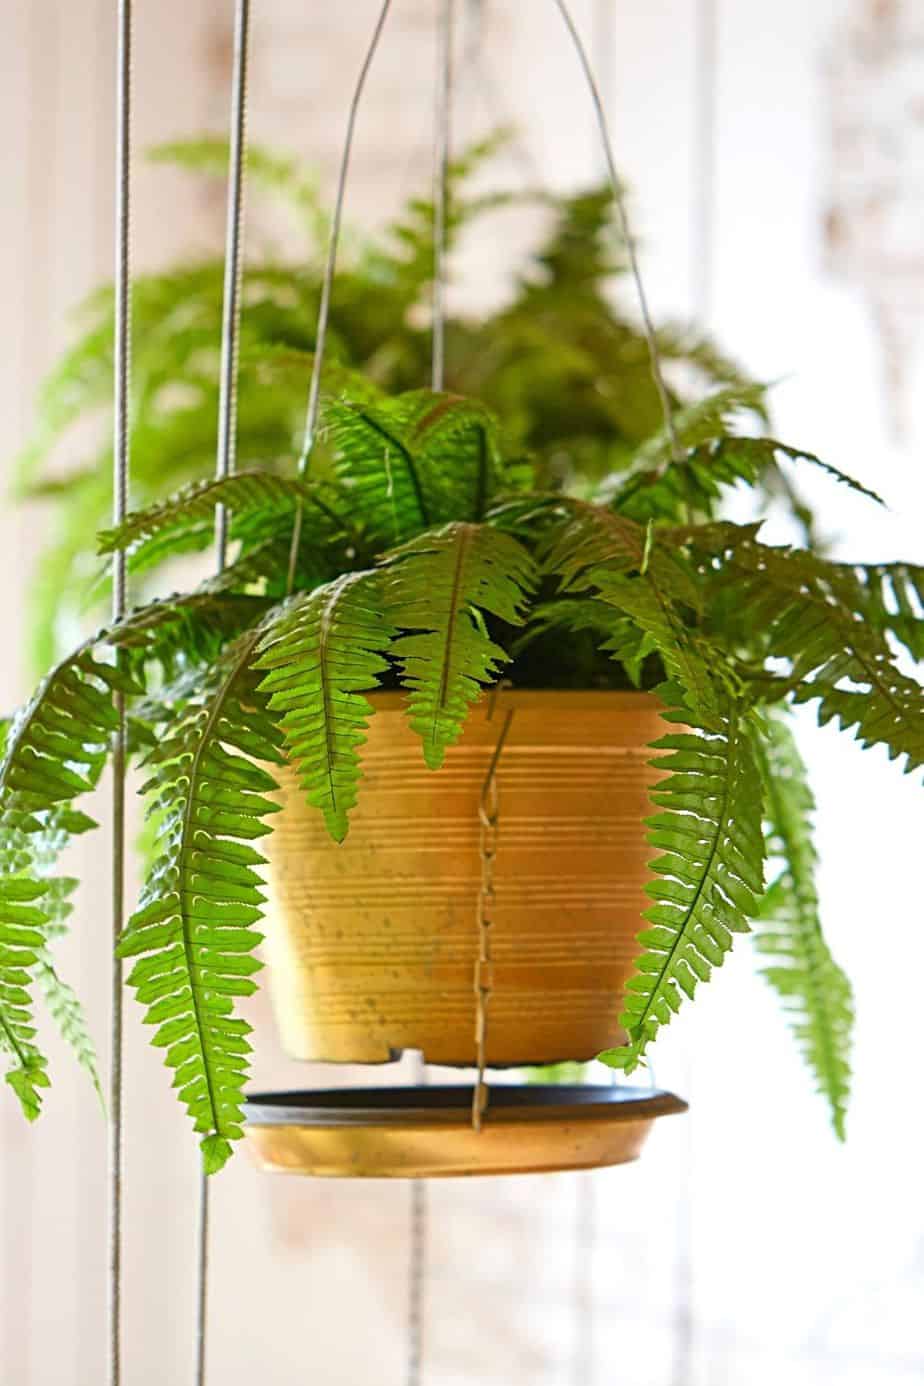 Ferns are stunning plants that you can grow on your east-facing balcony